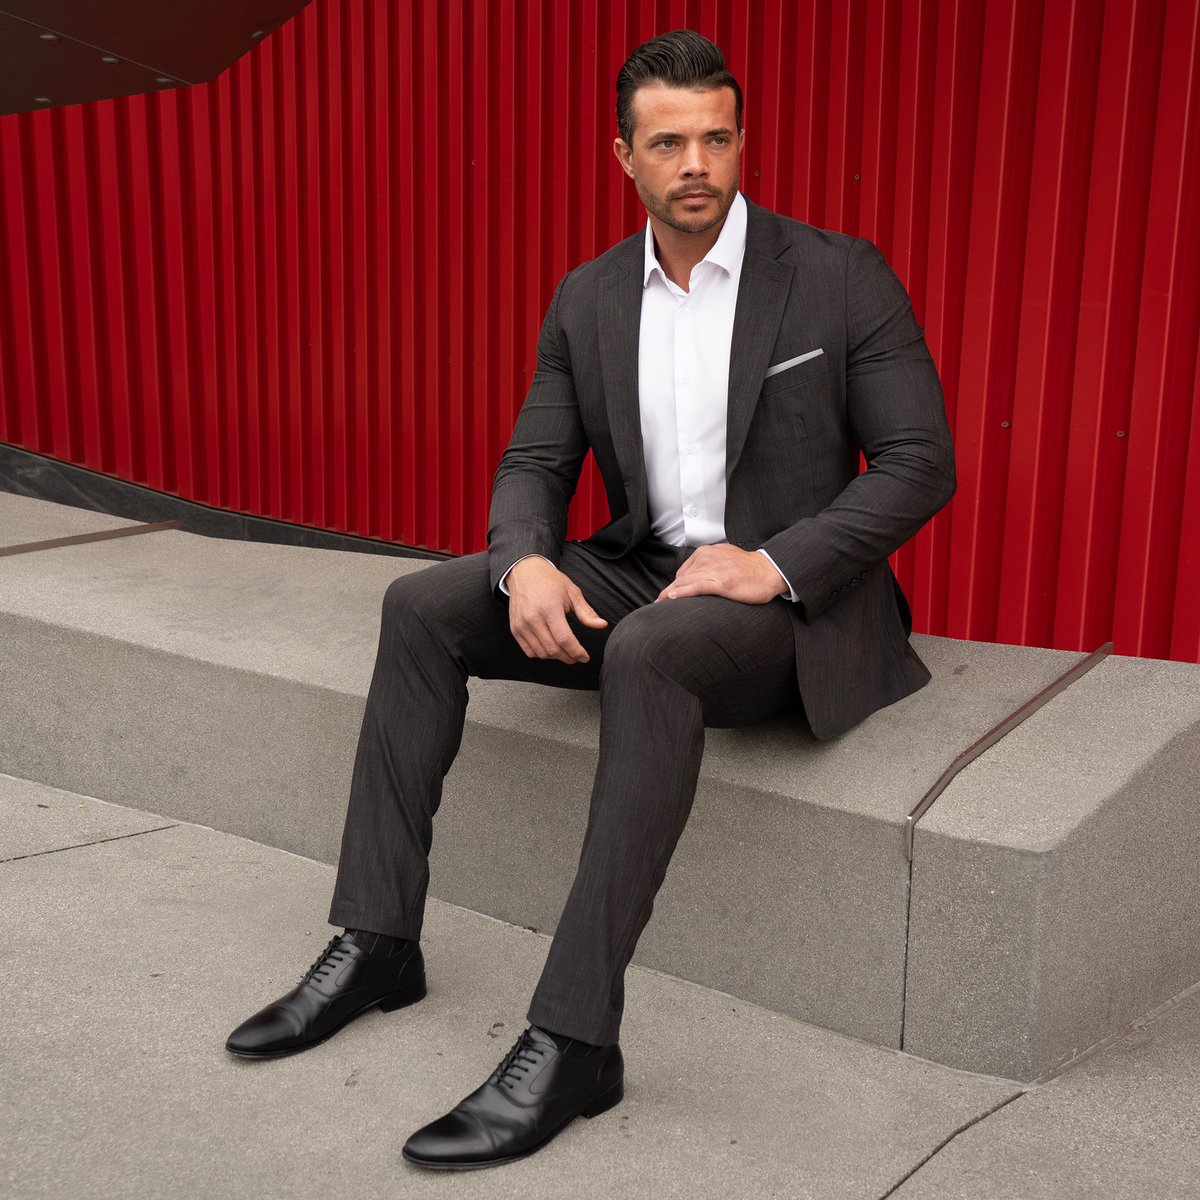 Elevate your business attire game with our new Heathered Charcoal ready-to-wear suit. Engineered from a performance fabric blend that offers unparalleled stretch while maintaining a sharp, professional appearance. From the boardroom to after-work gatherings, make a statement…